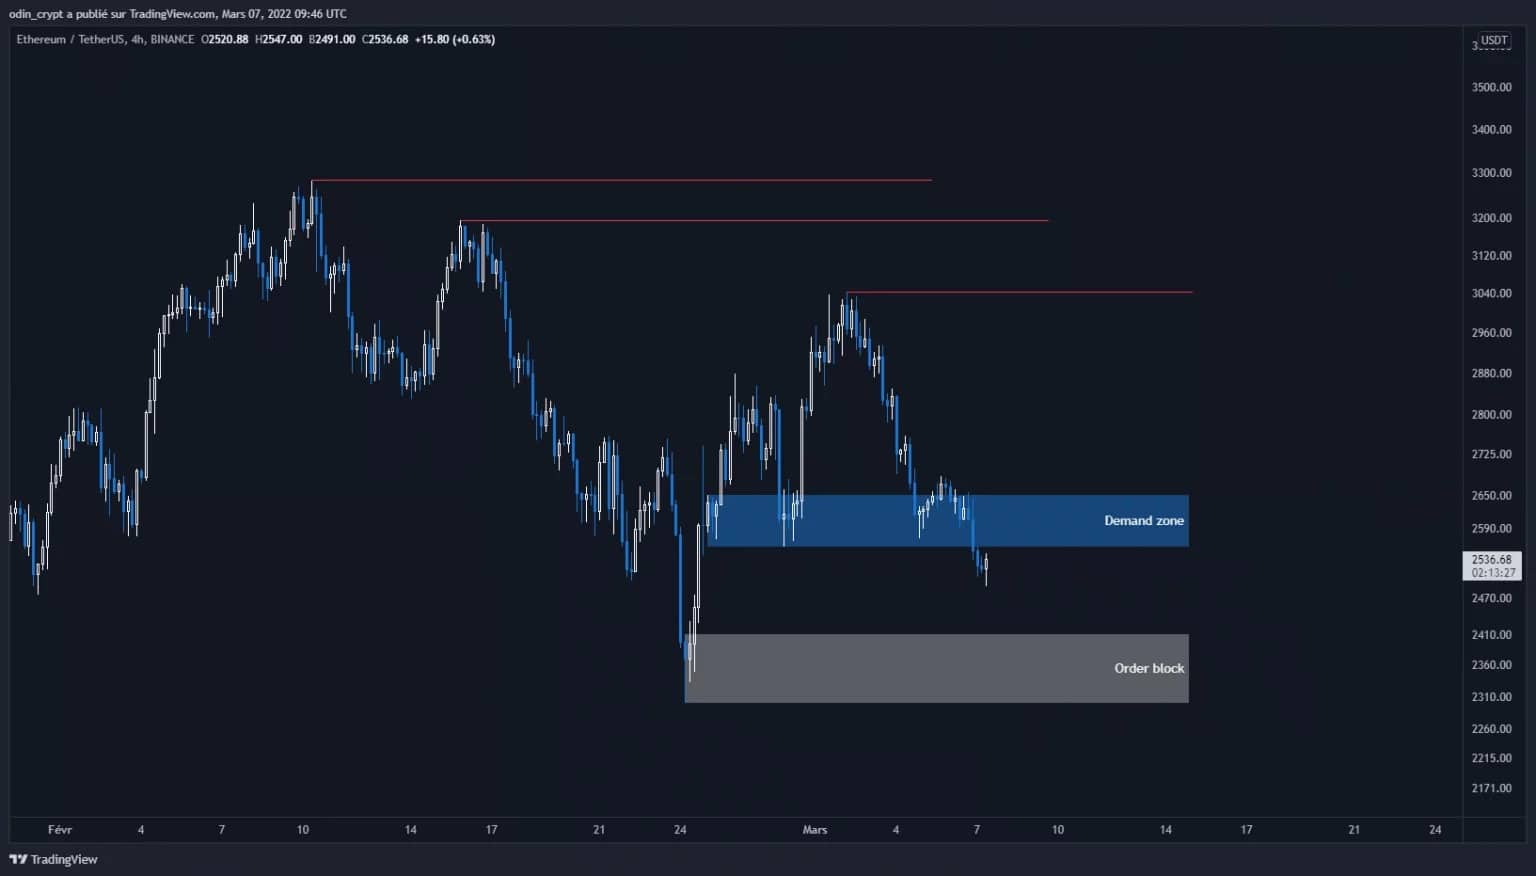 Ether (ETH) analysis in 4H